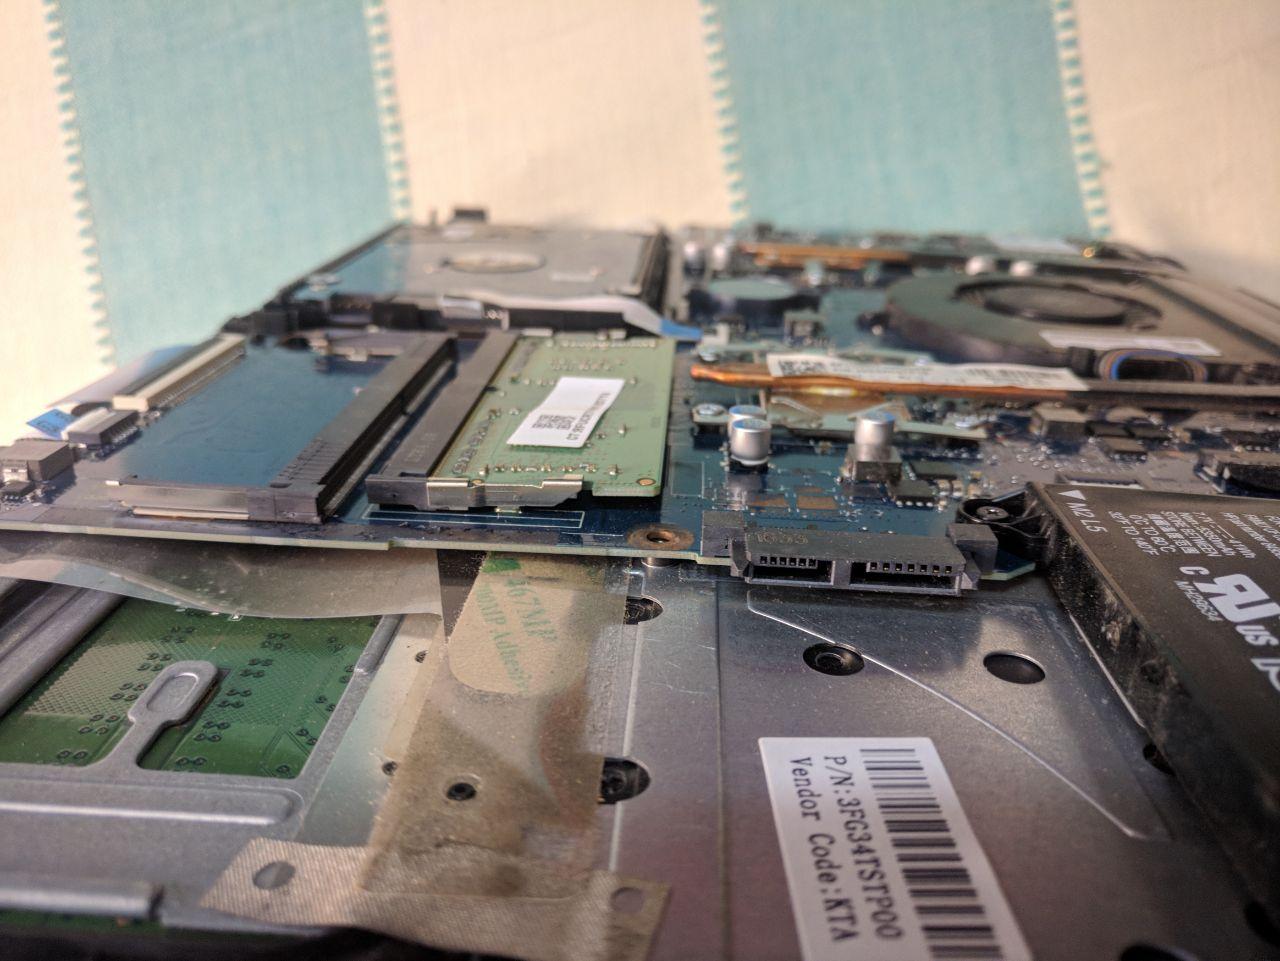 Solved: SSD-UPGRADE HP PAVILION 15AU-189TX - HP Support Community - 6868606